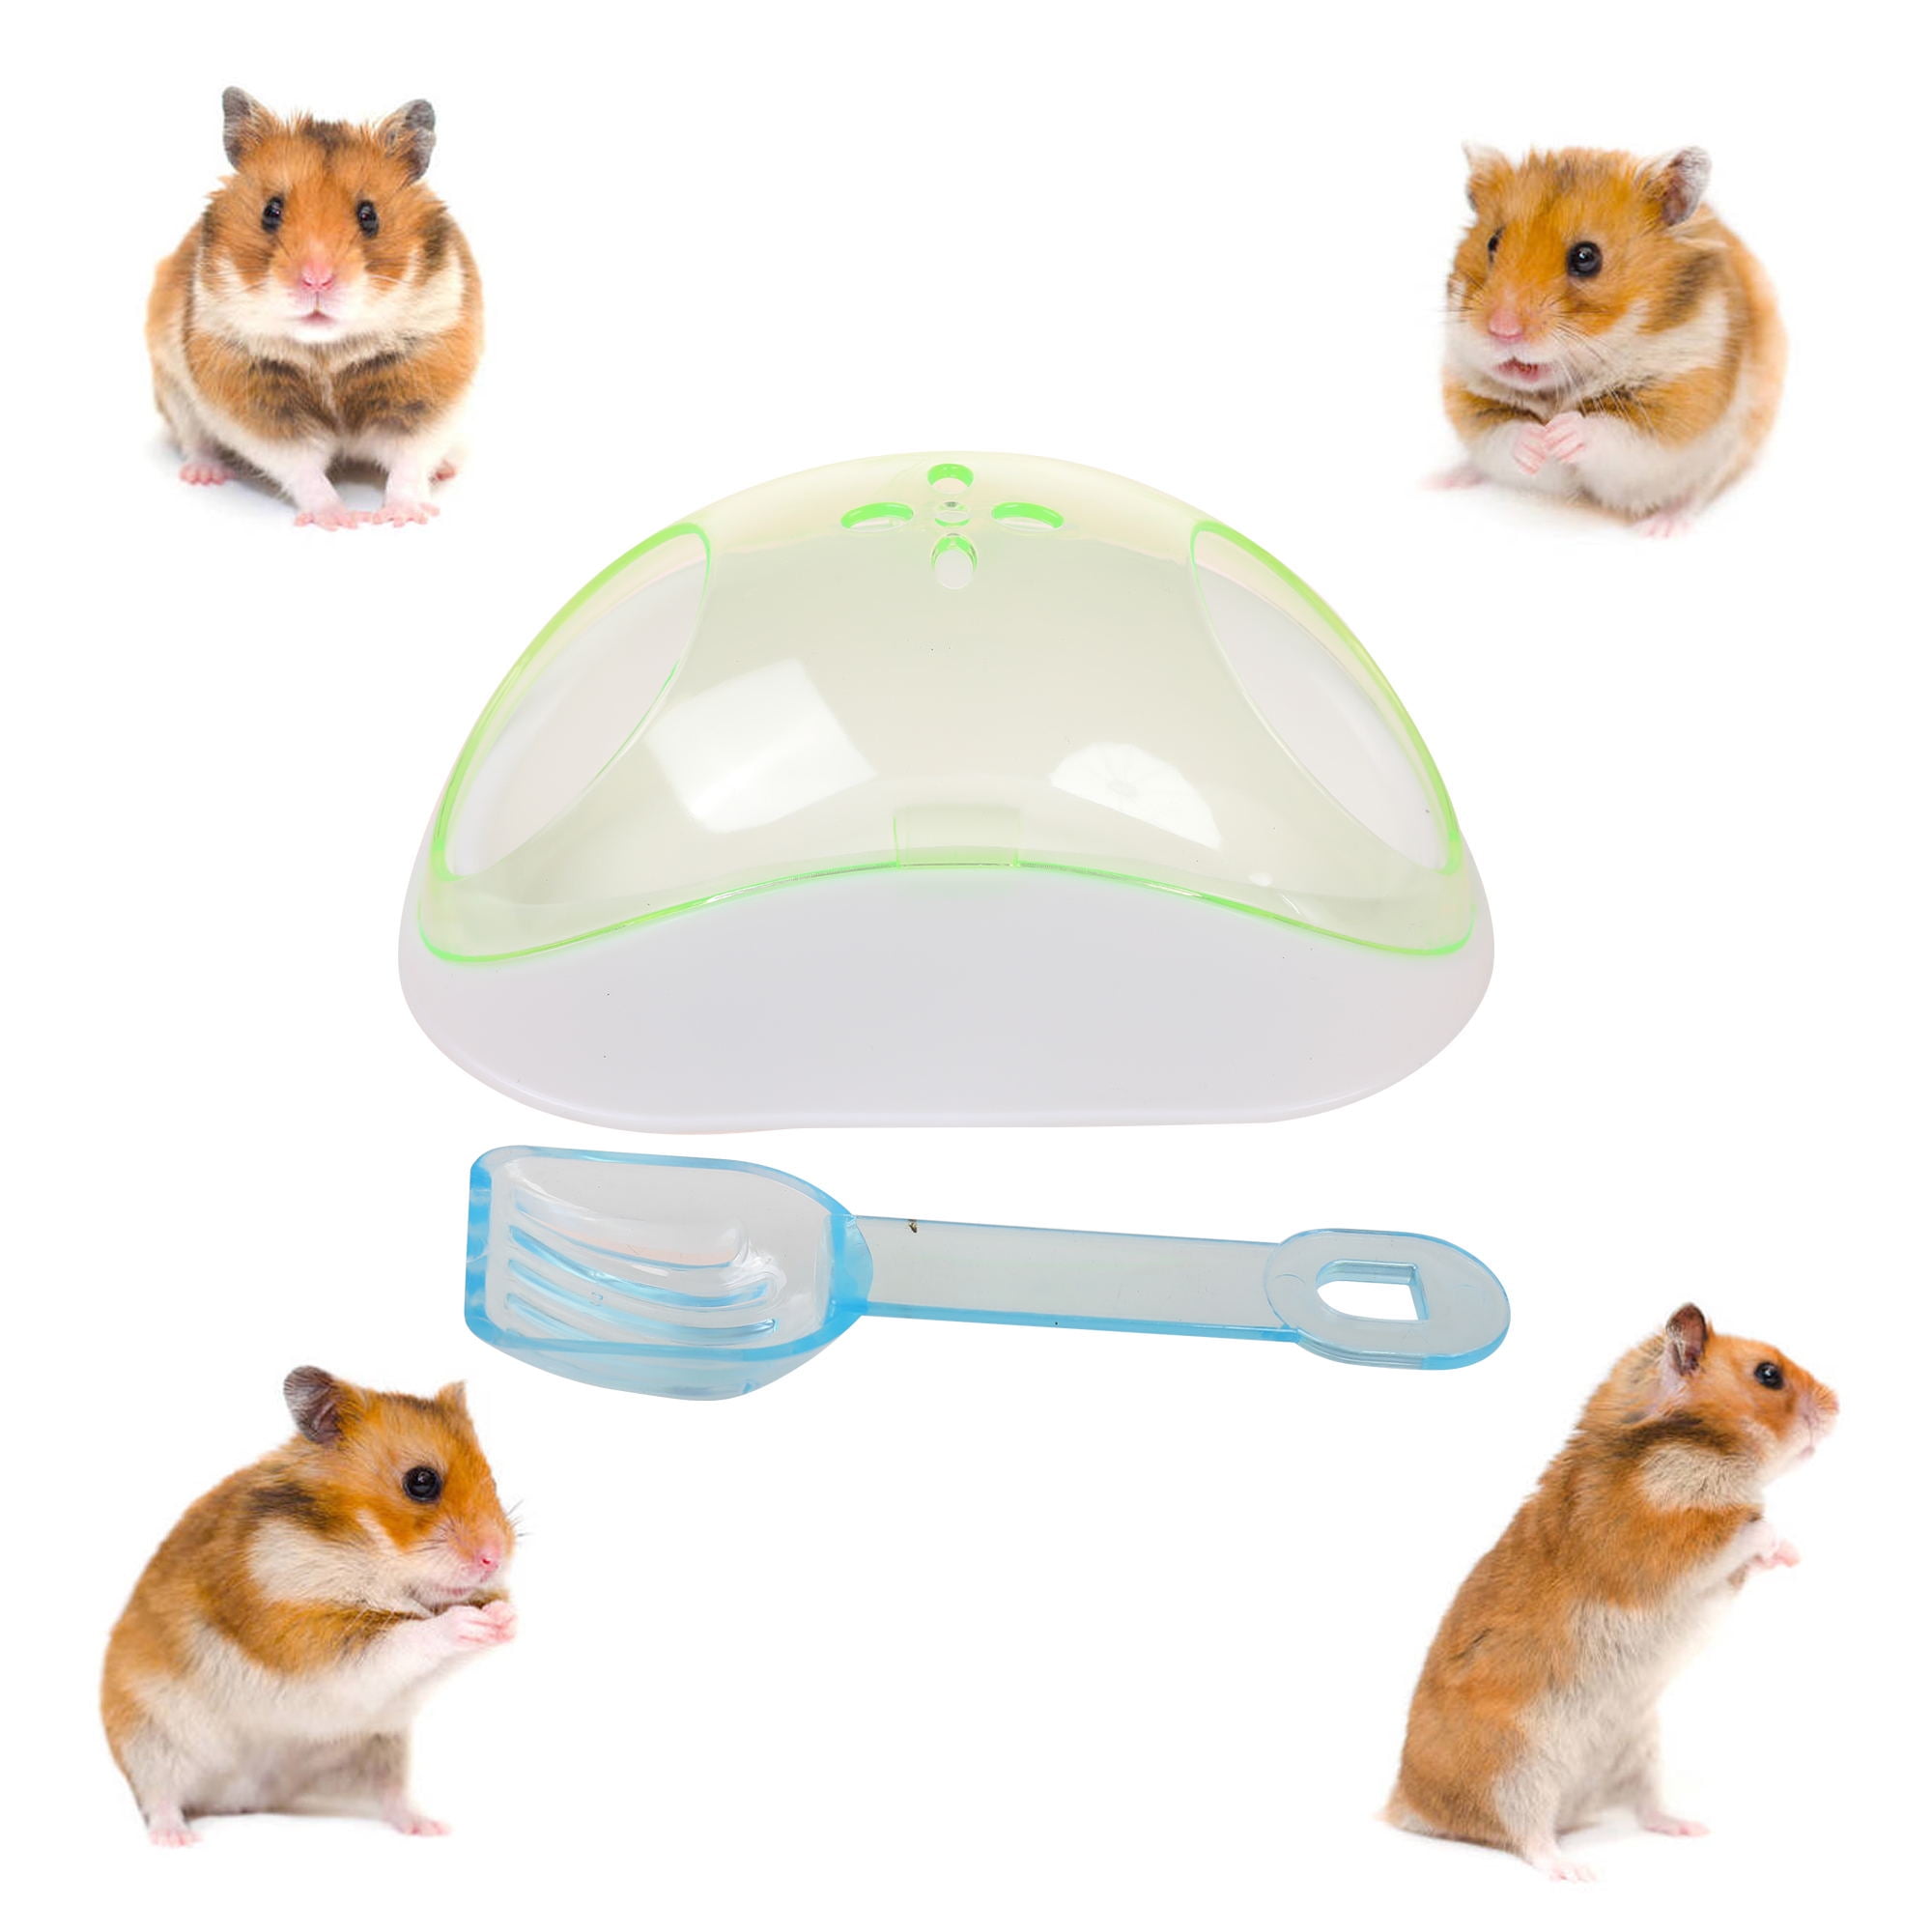 Durable Hamster Mice Rat Bathroom Cage Box Toy Toilet with Sand Shovel Supplies 